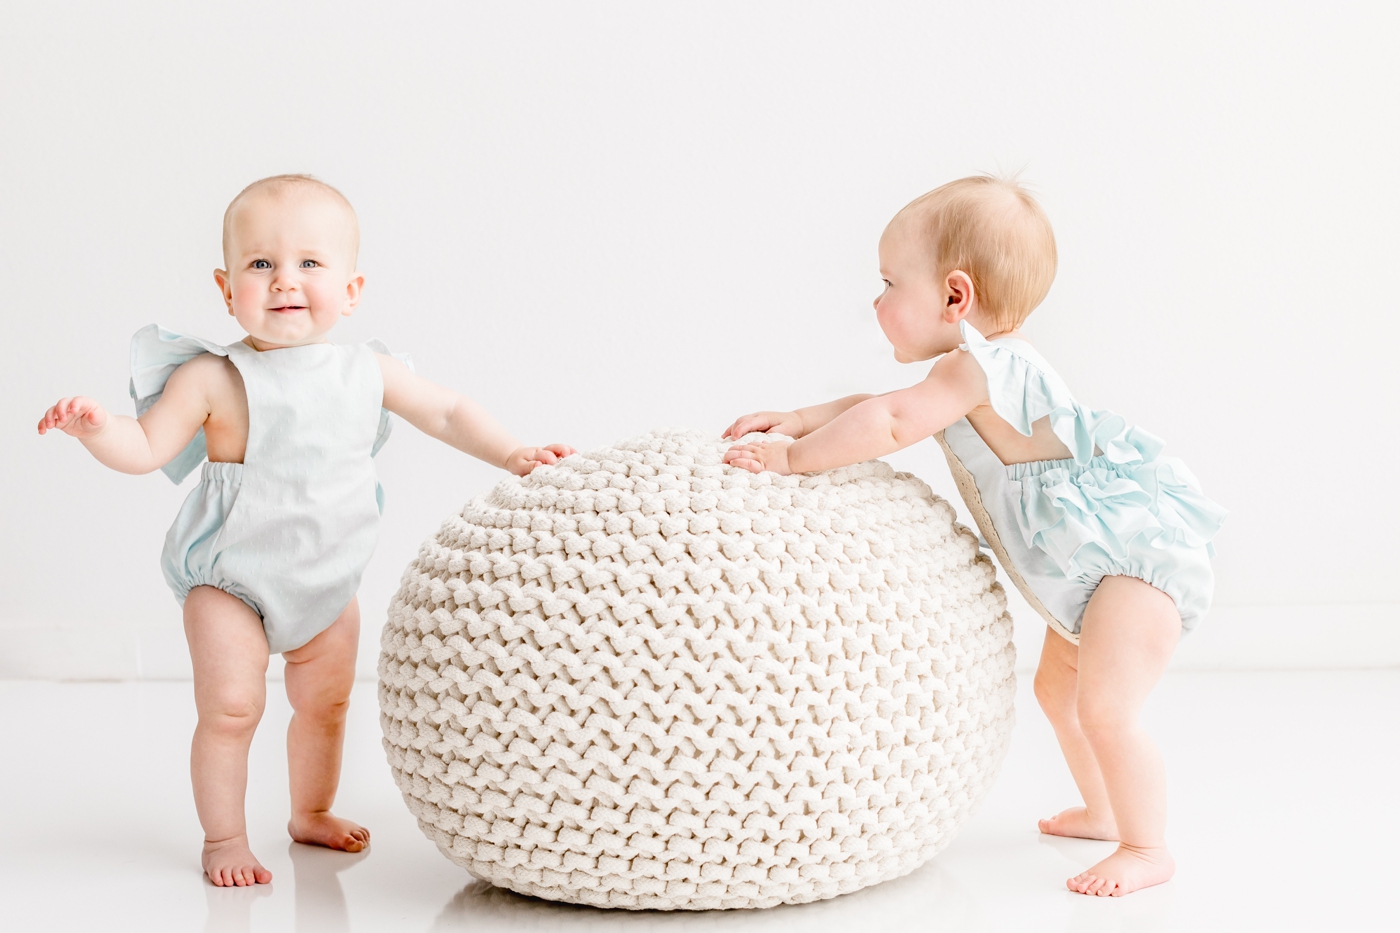 Twin girls using knit pouf to support them as they stand during milestone photo session. Photo by Sana Ahmed Photography.